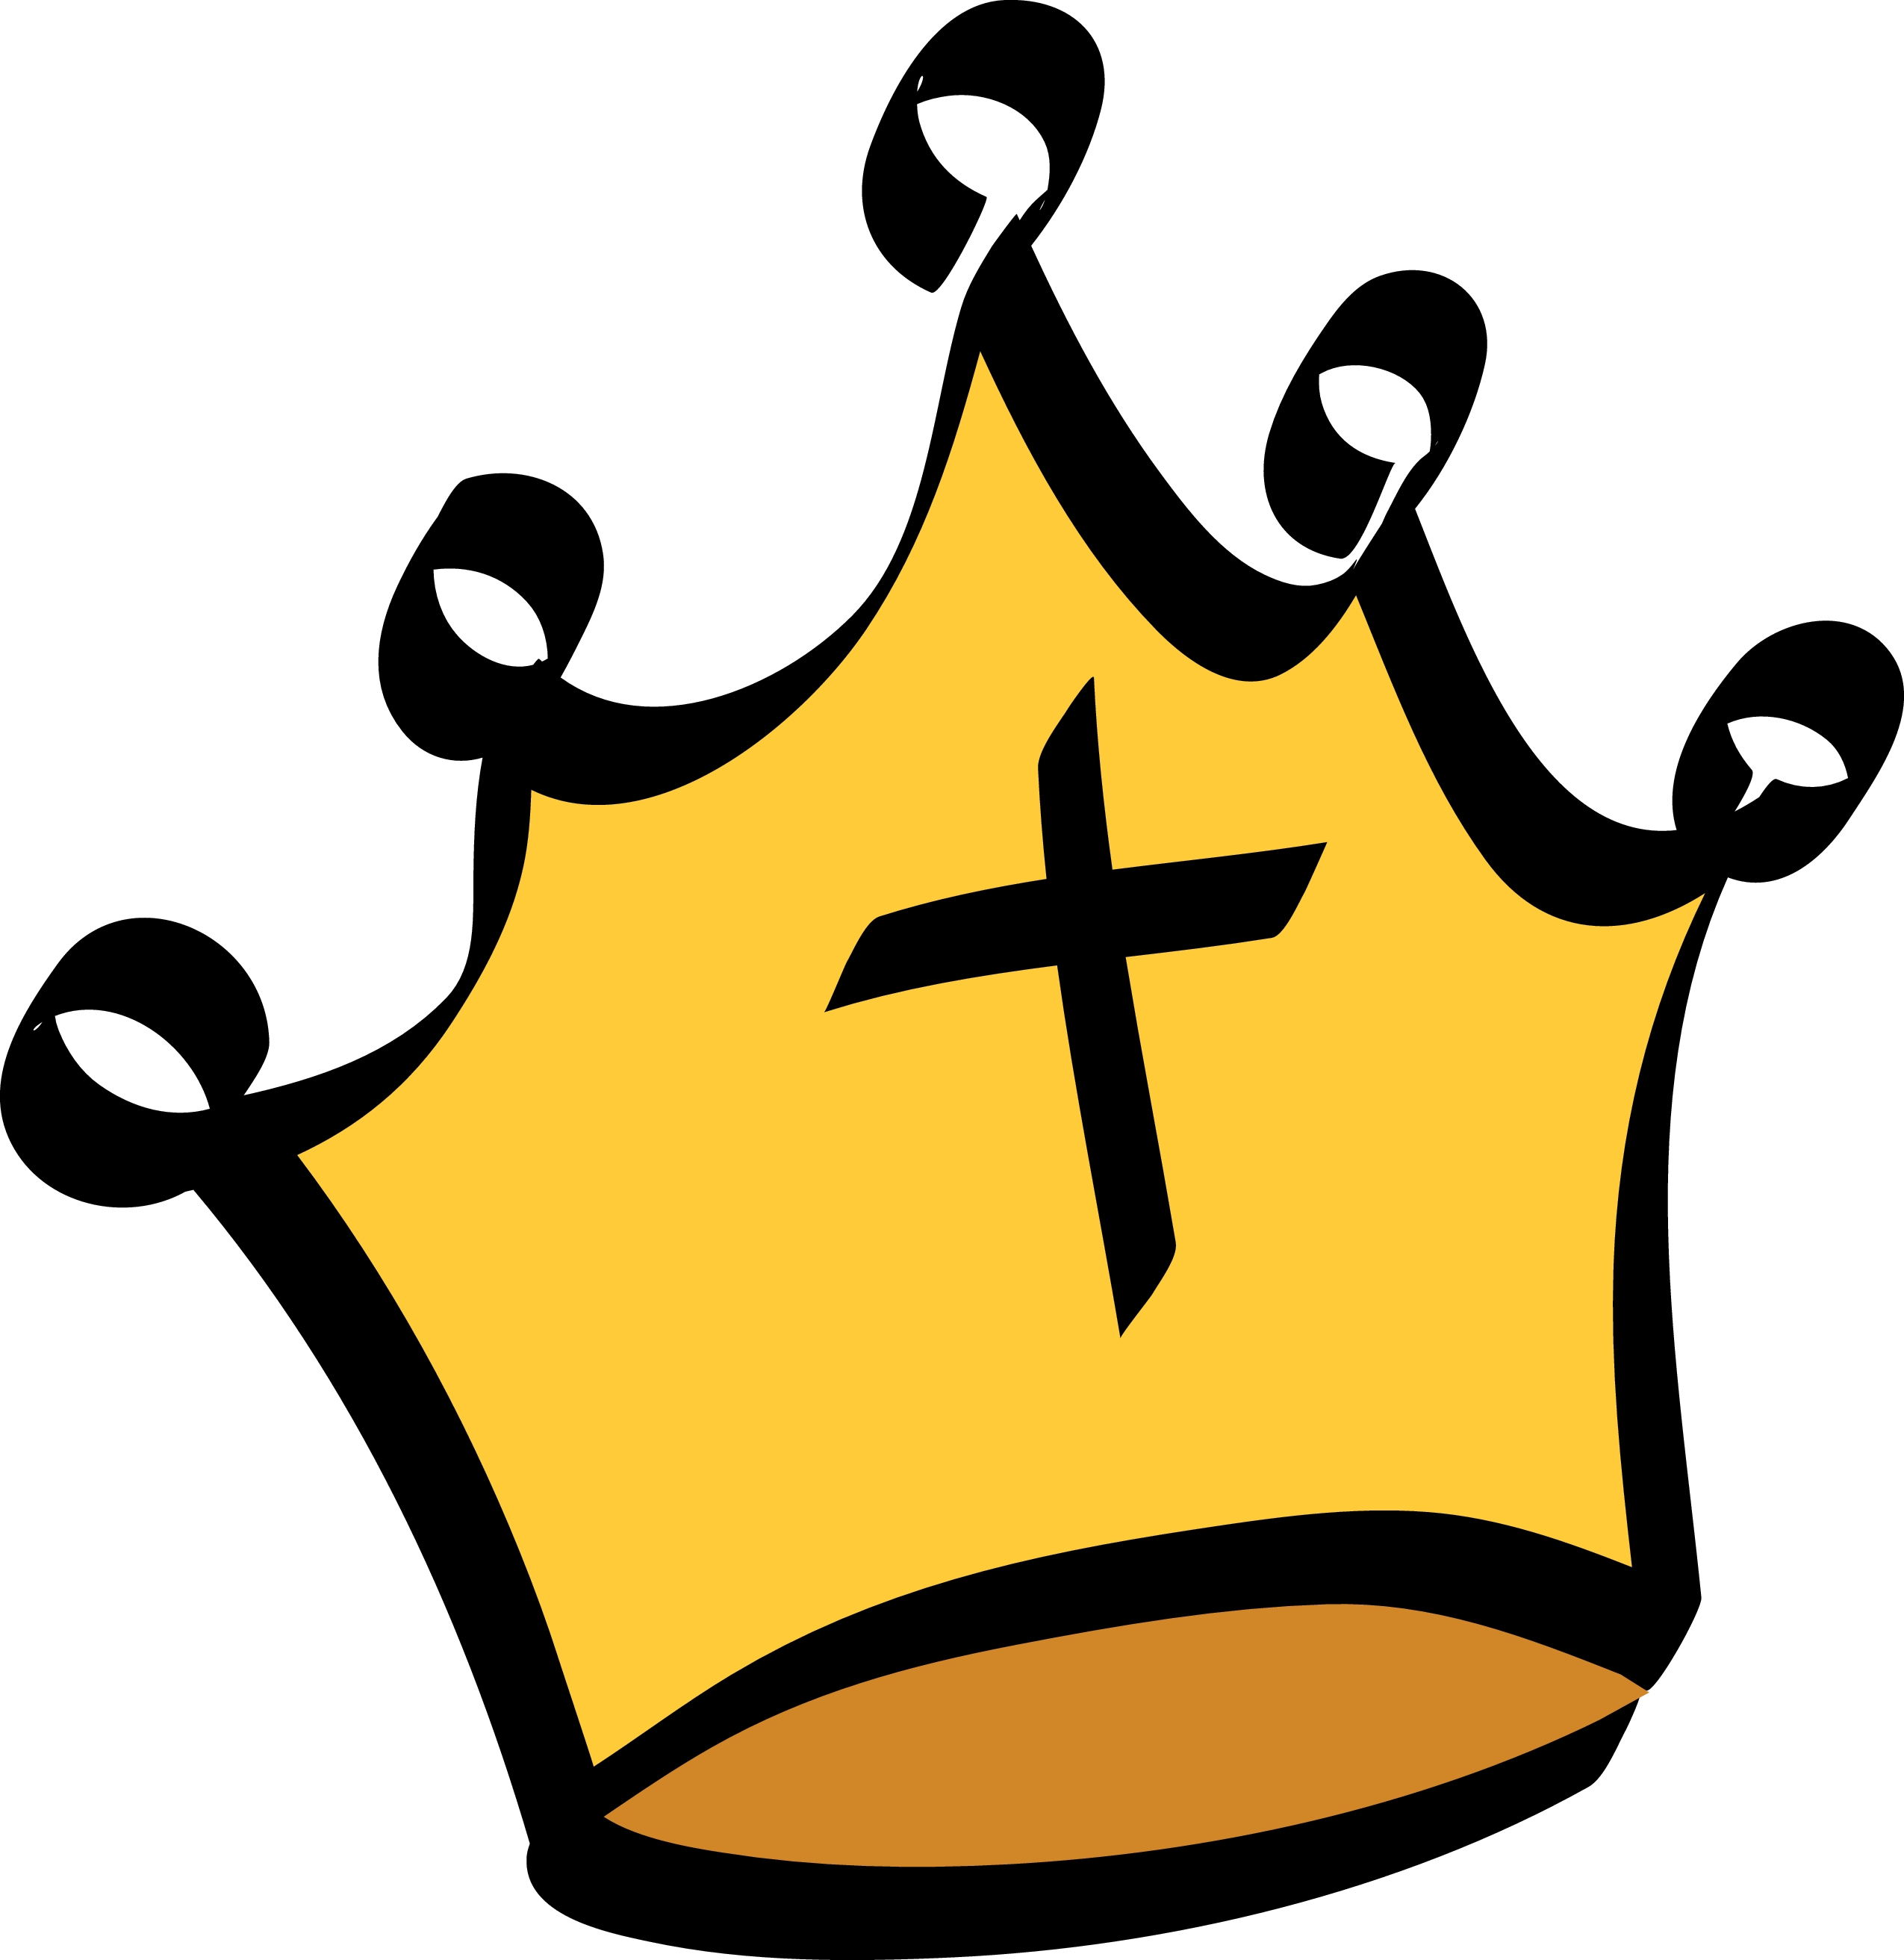 yellow crown clipart - photo #32